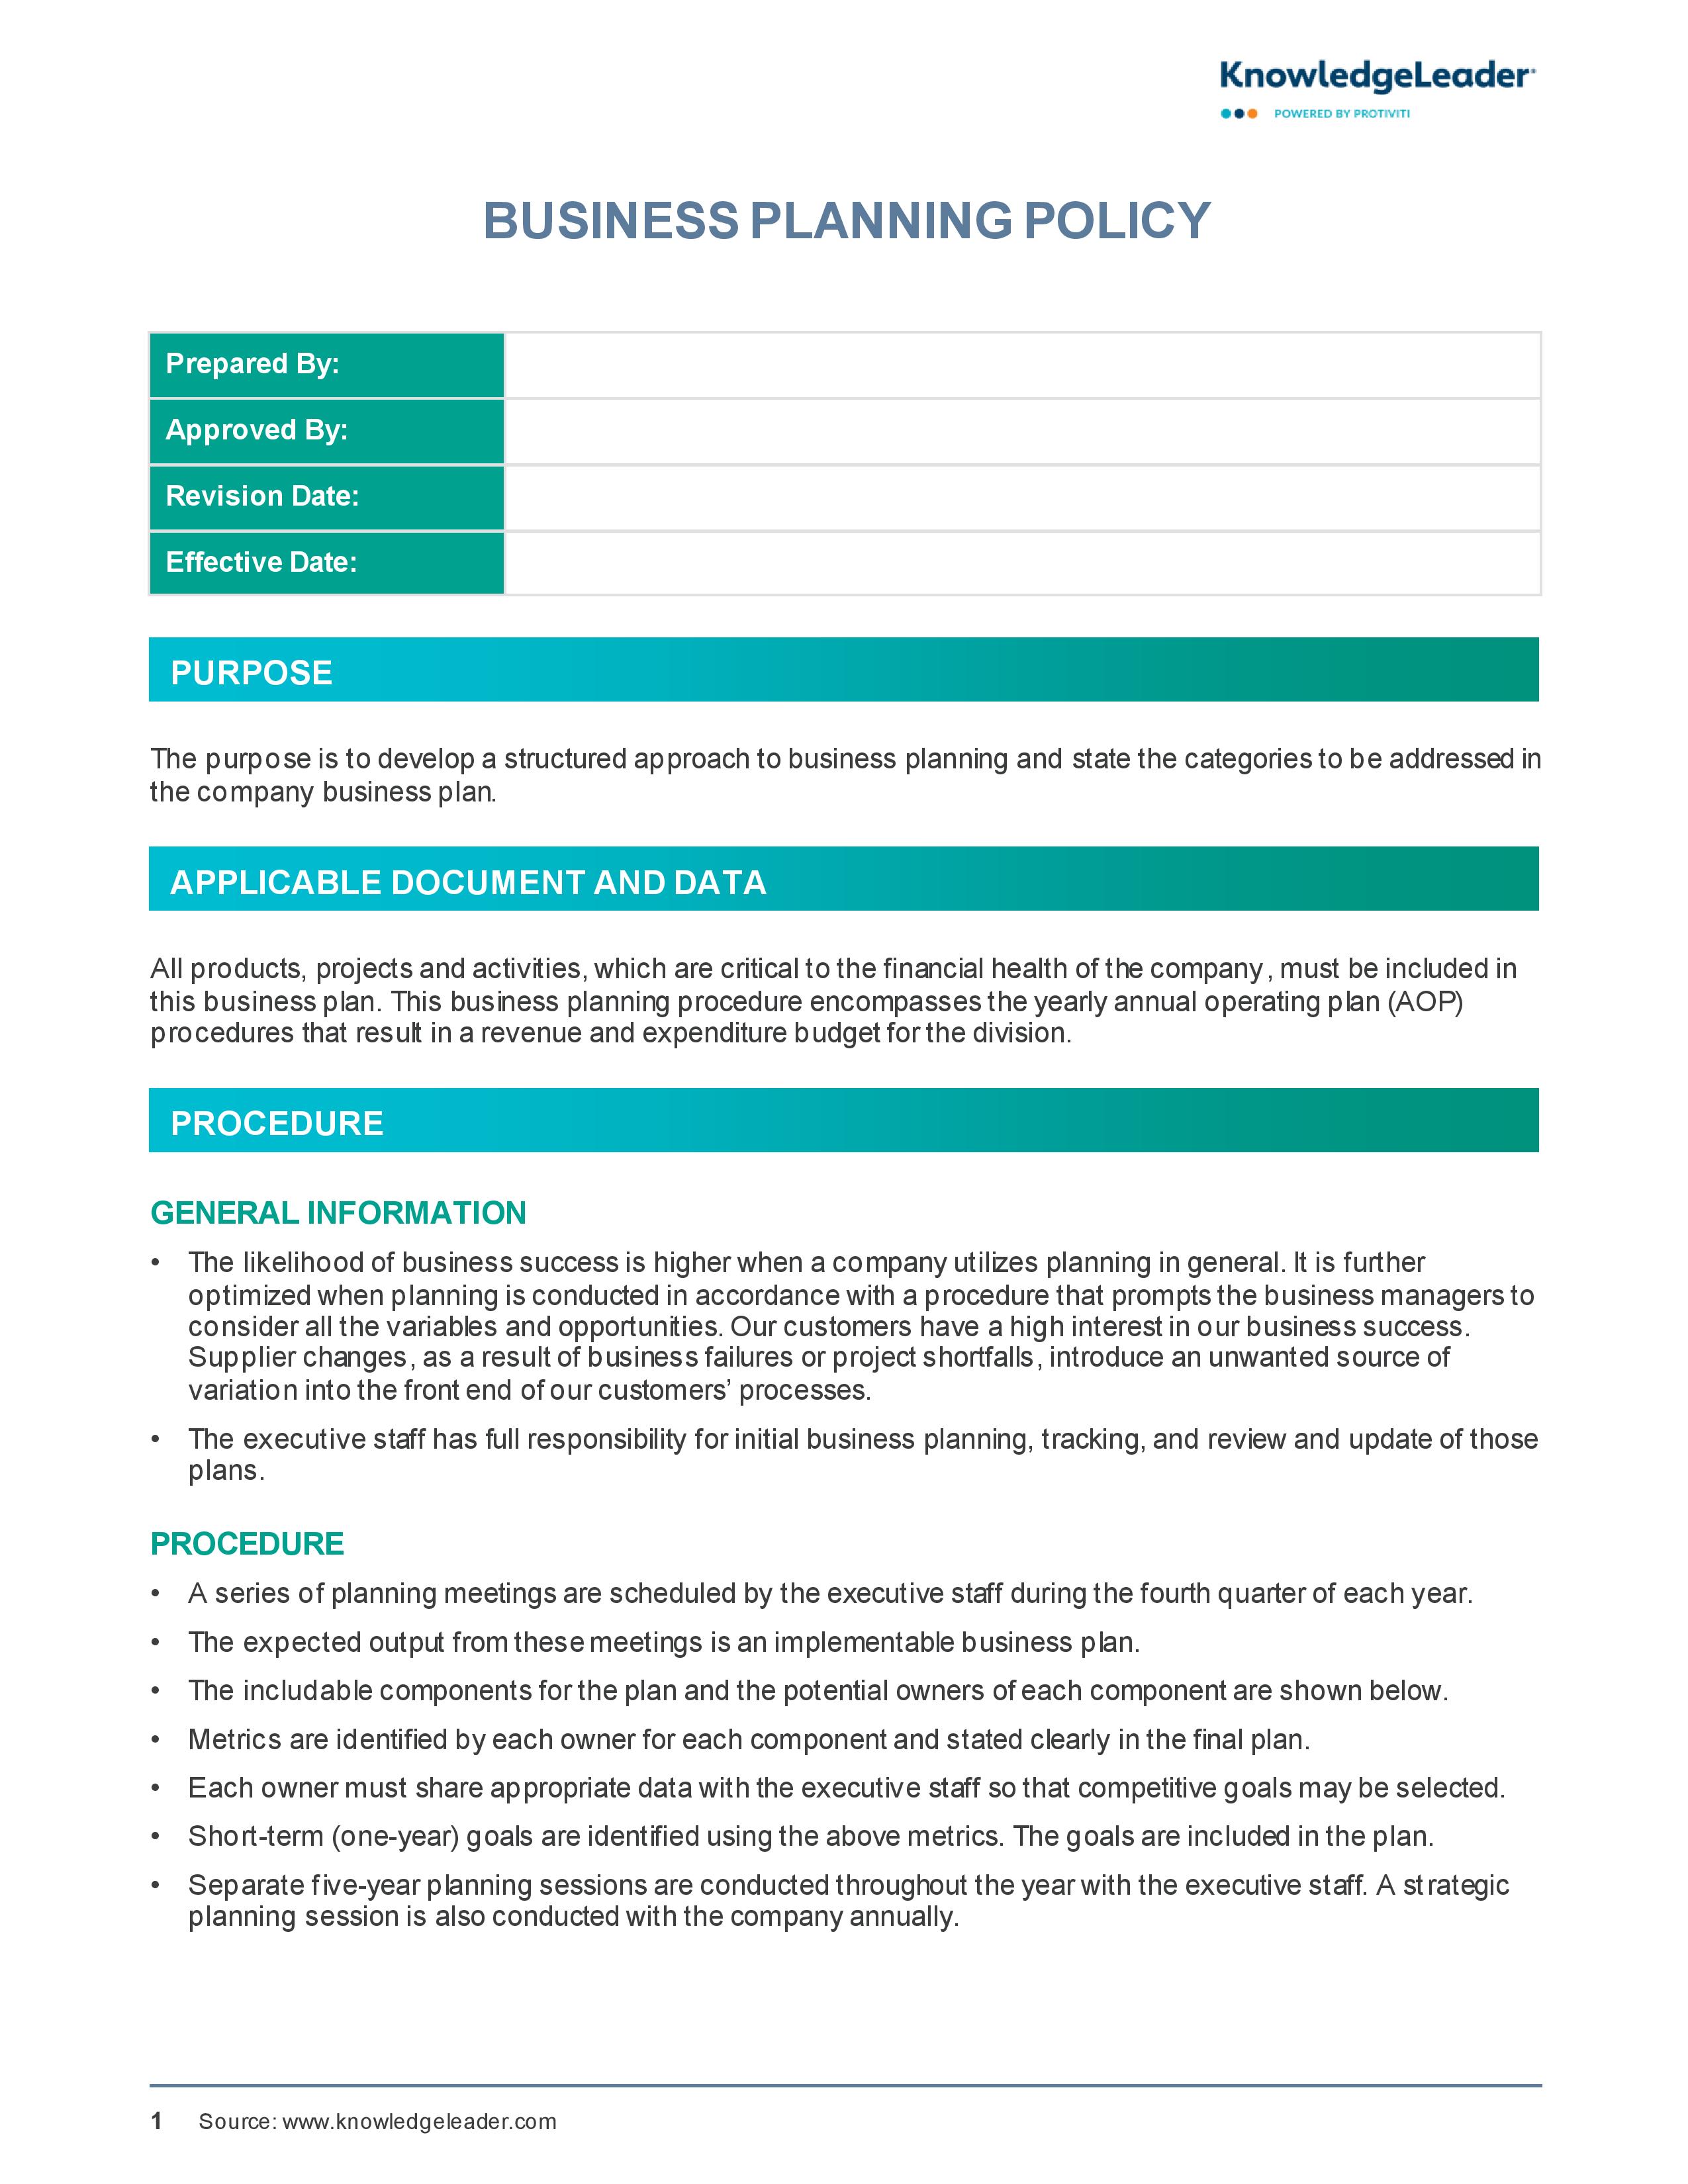 Screenshot of the first page of Business Planning Policy